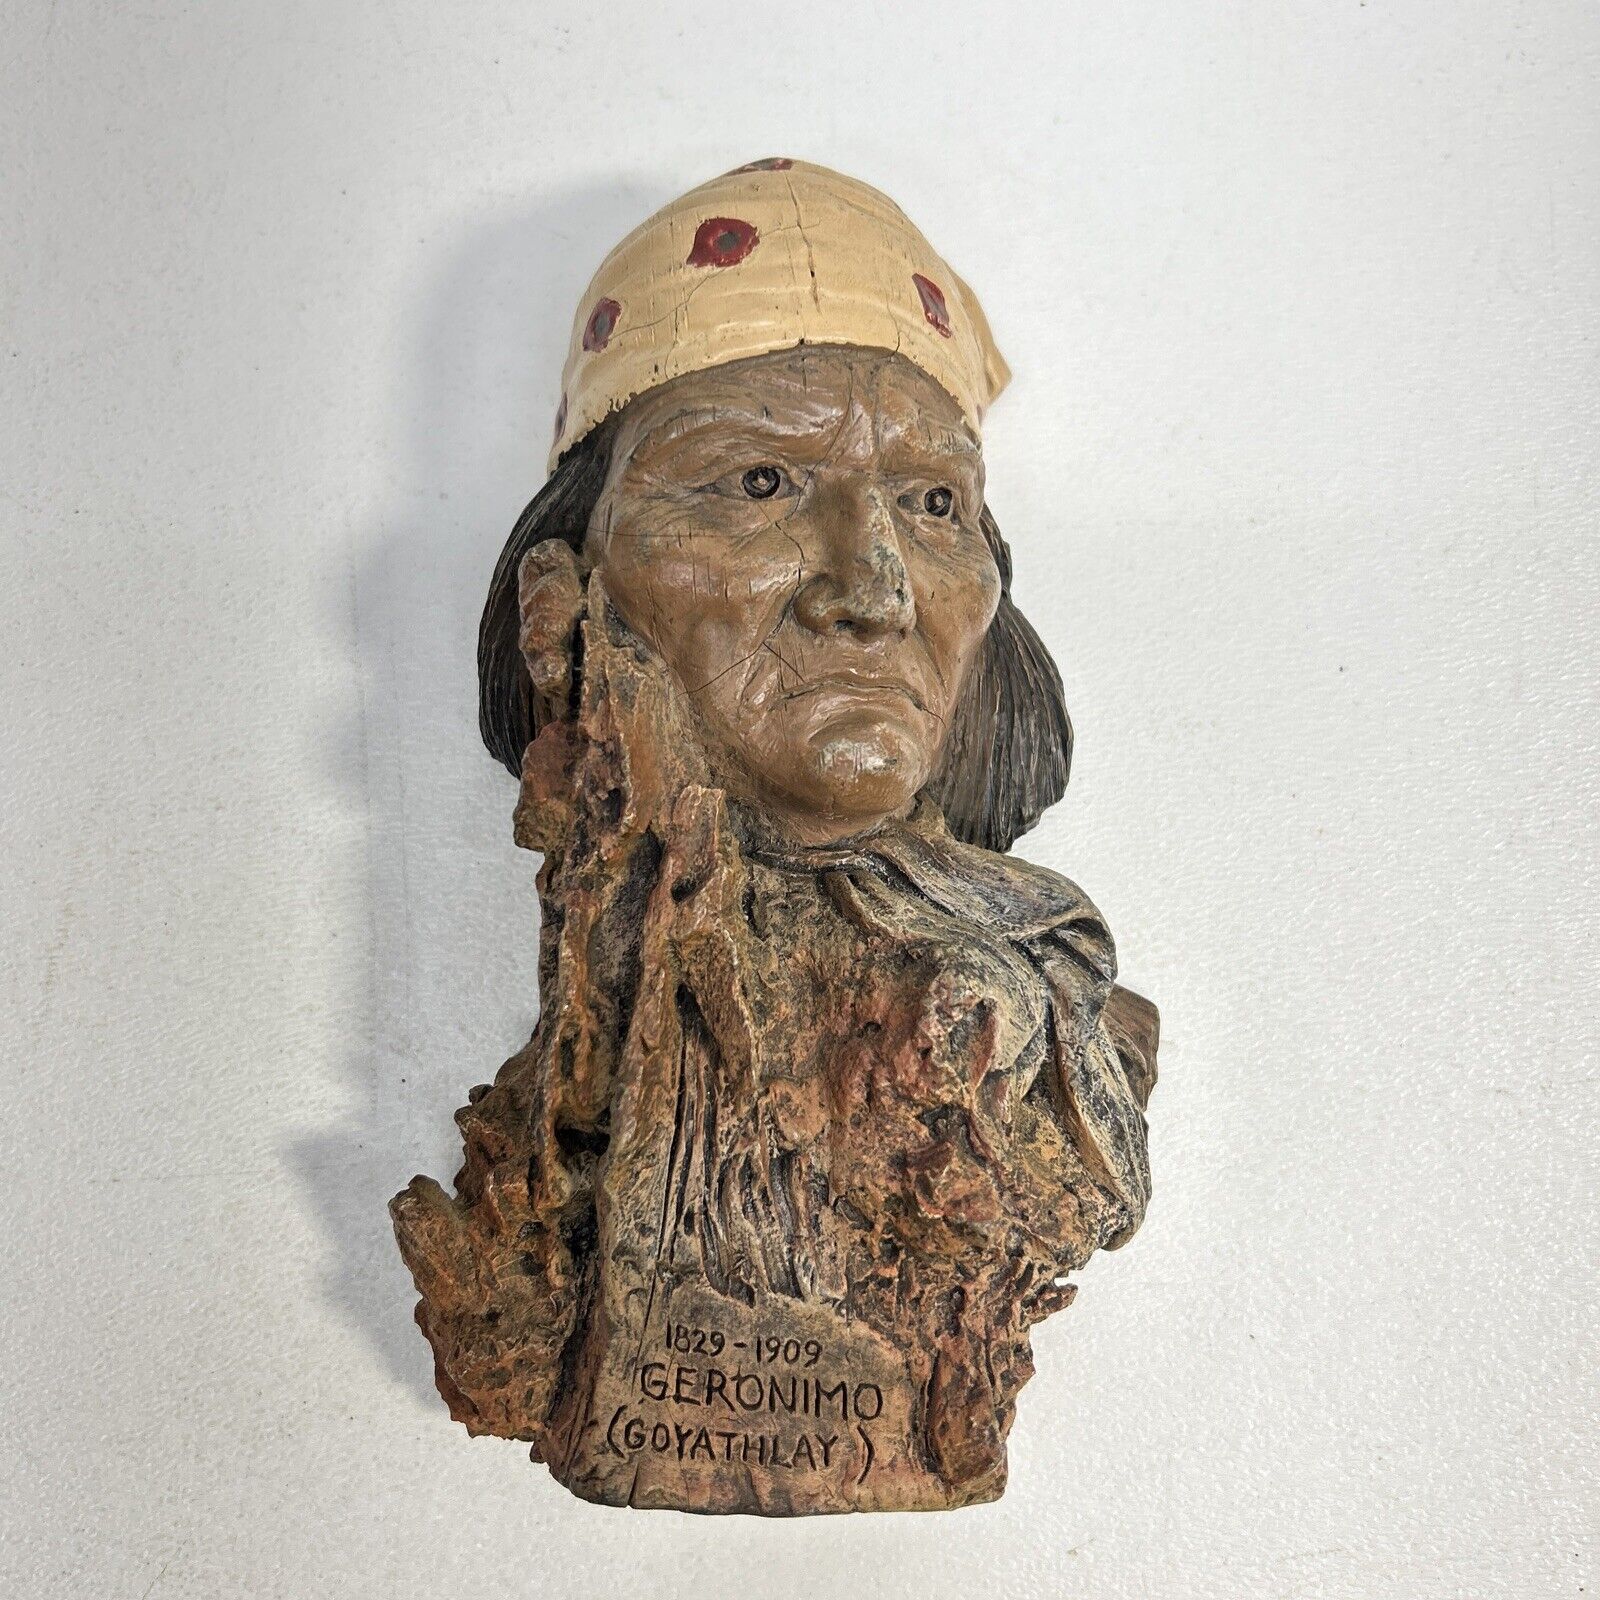 Geronimo 1829-1909 Goyathlay, Avery Creations, Resin Sculpture